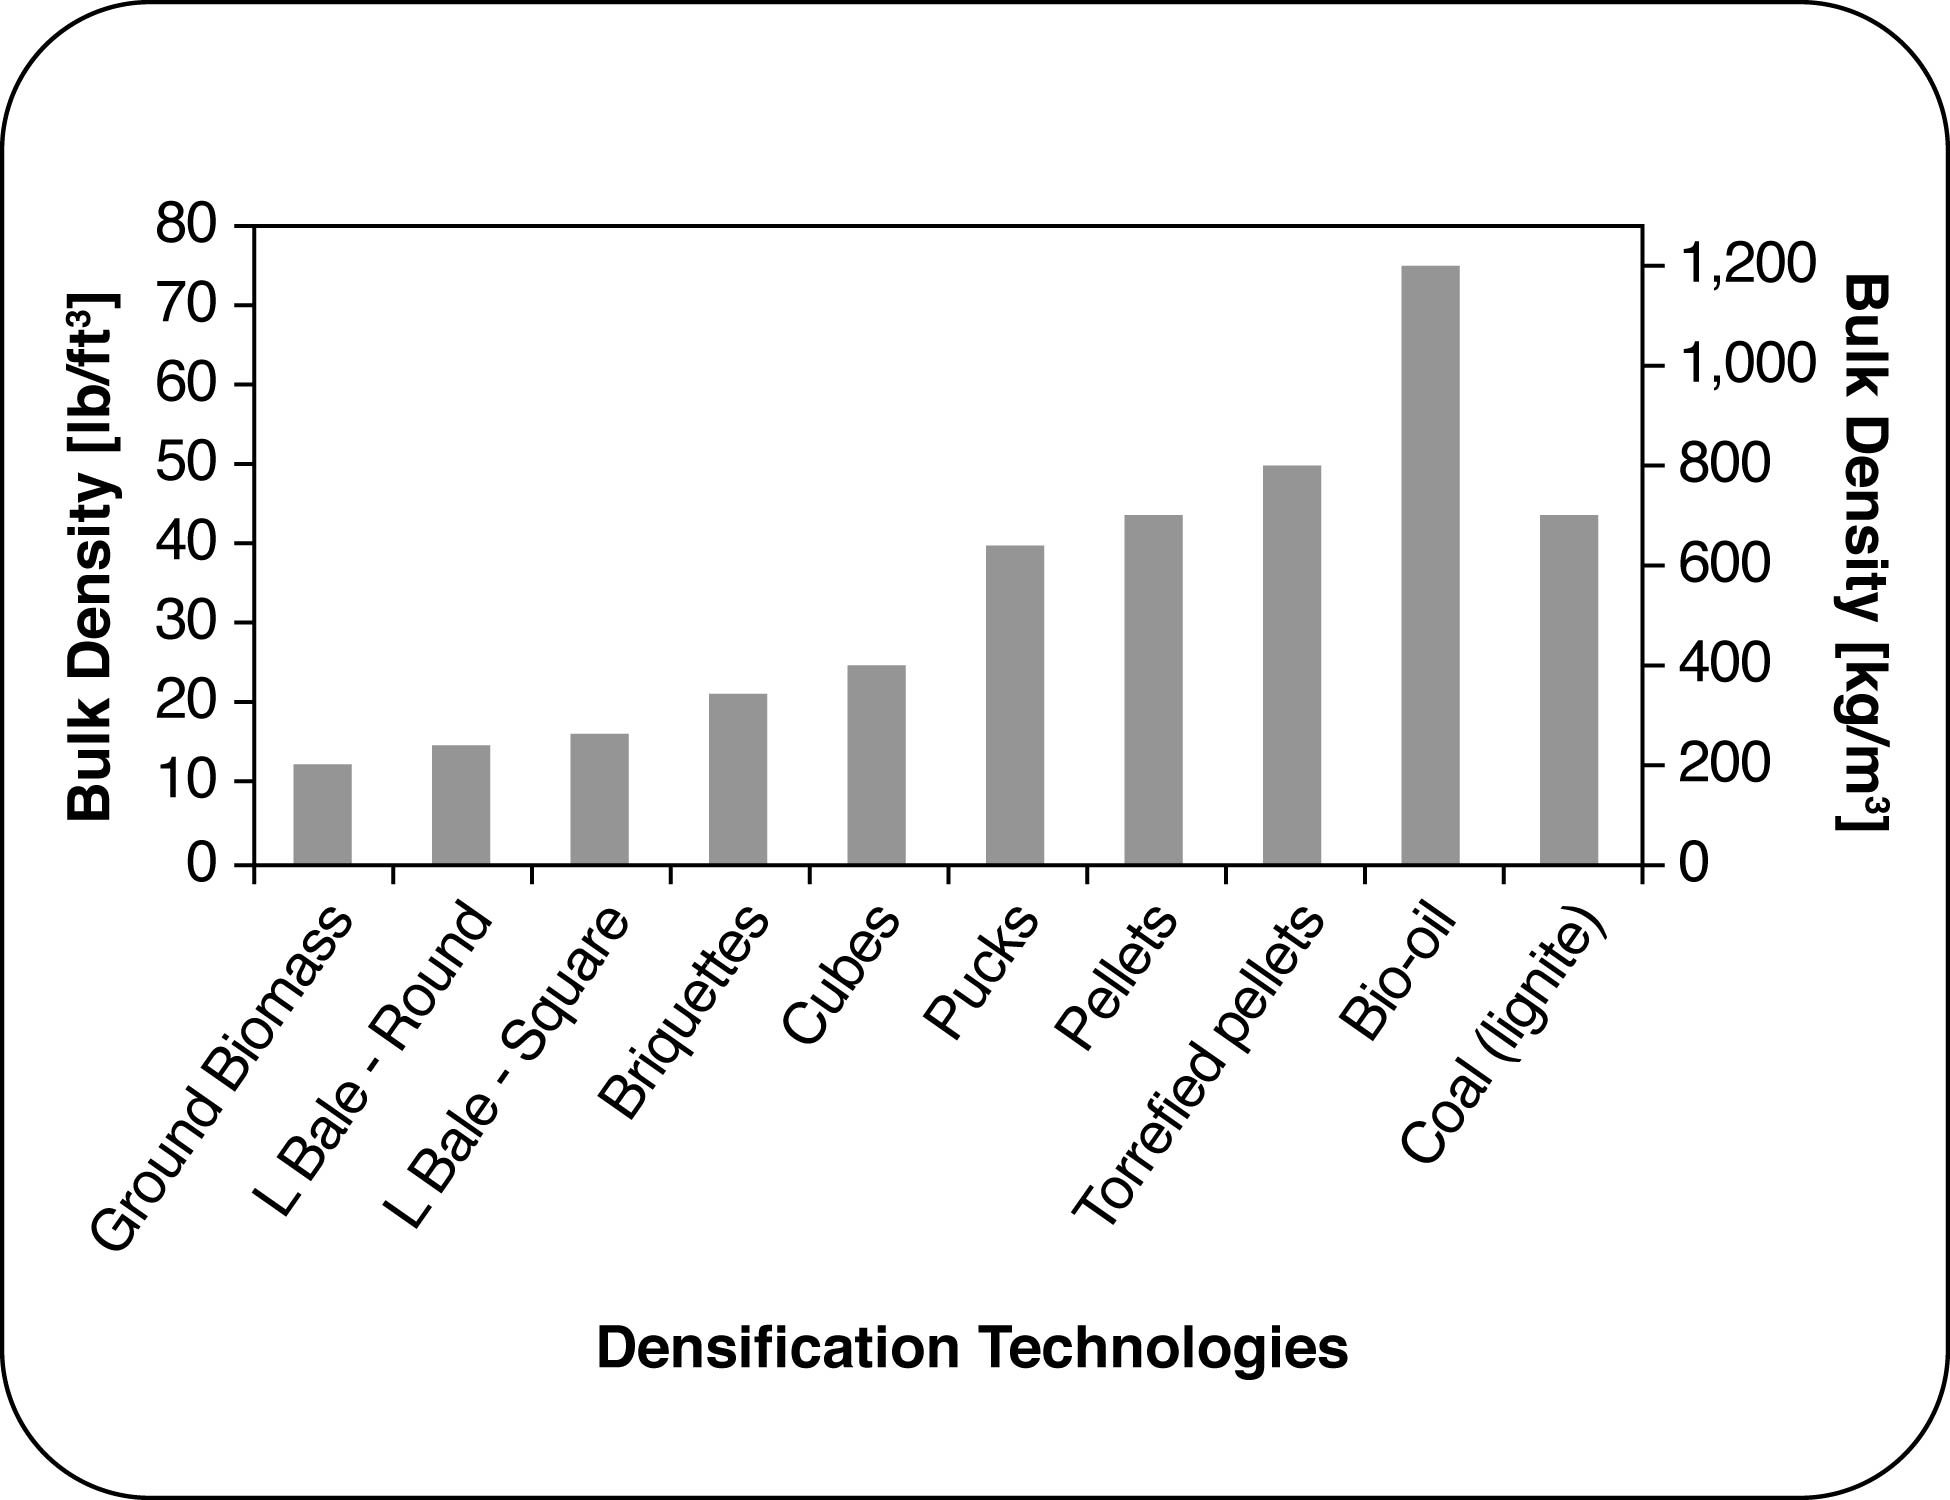 A bar chart showing the bulk densities of biomass based on various densification technologies.